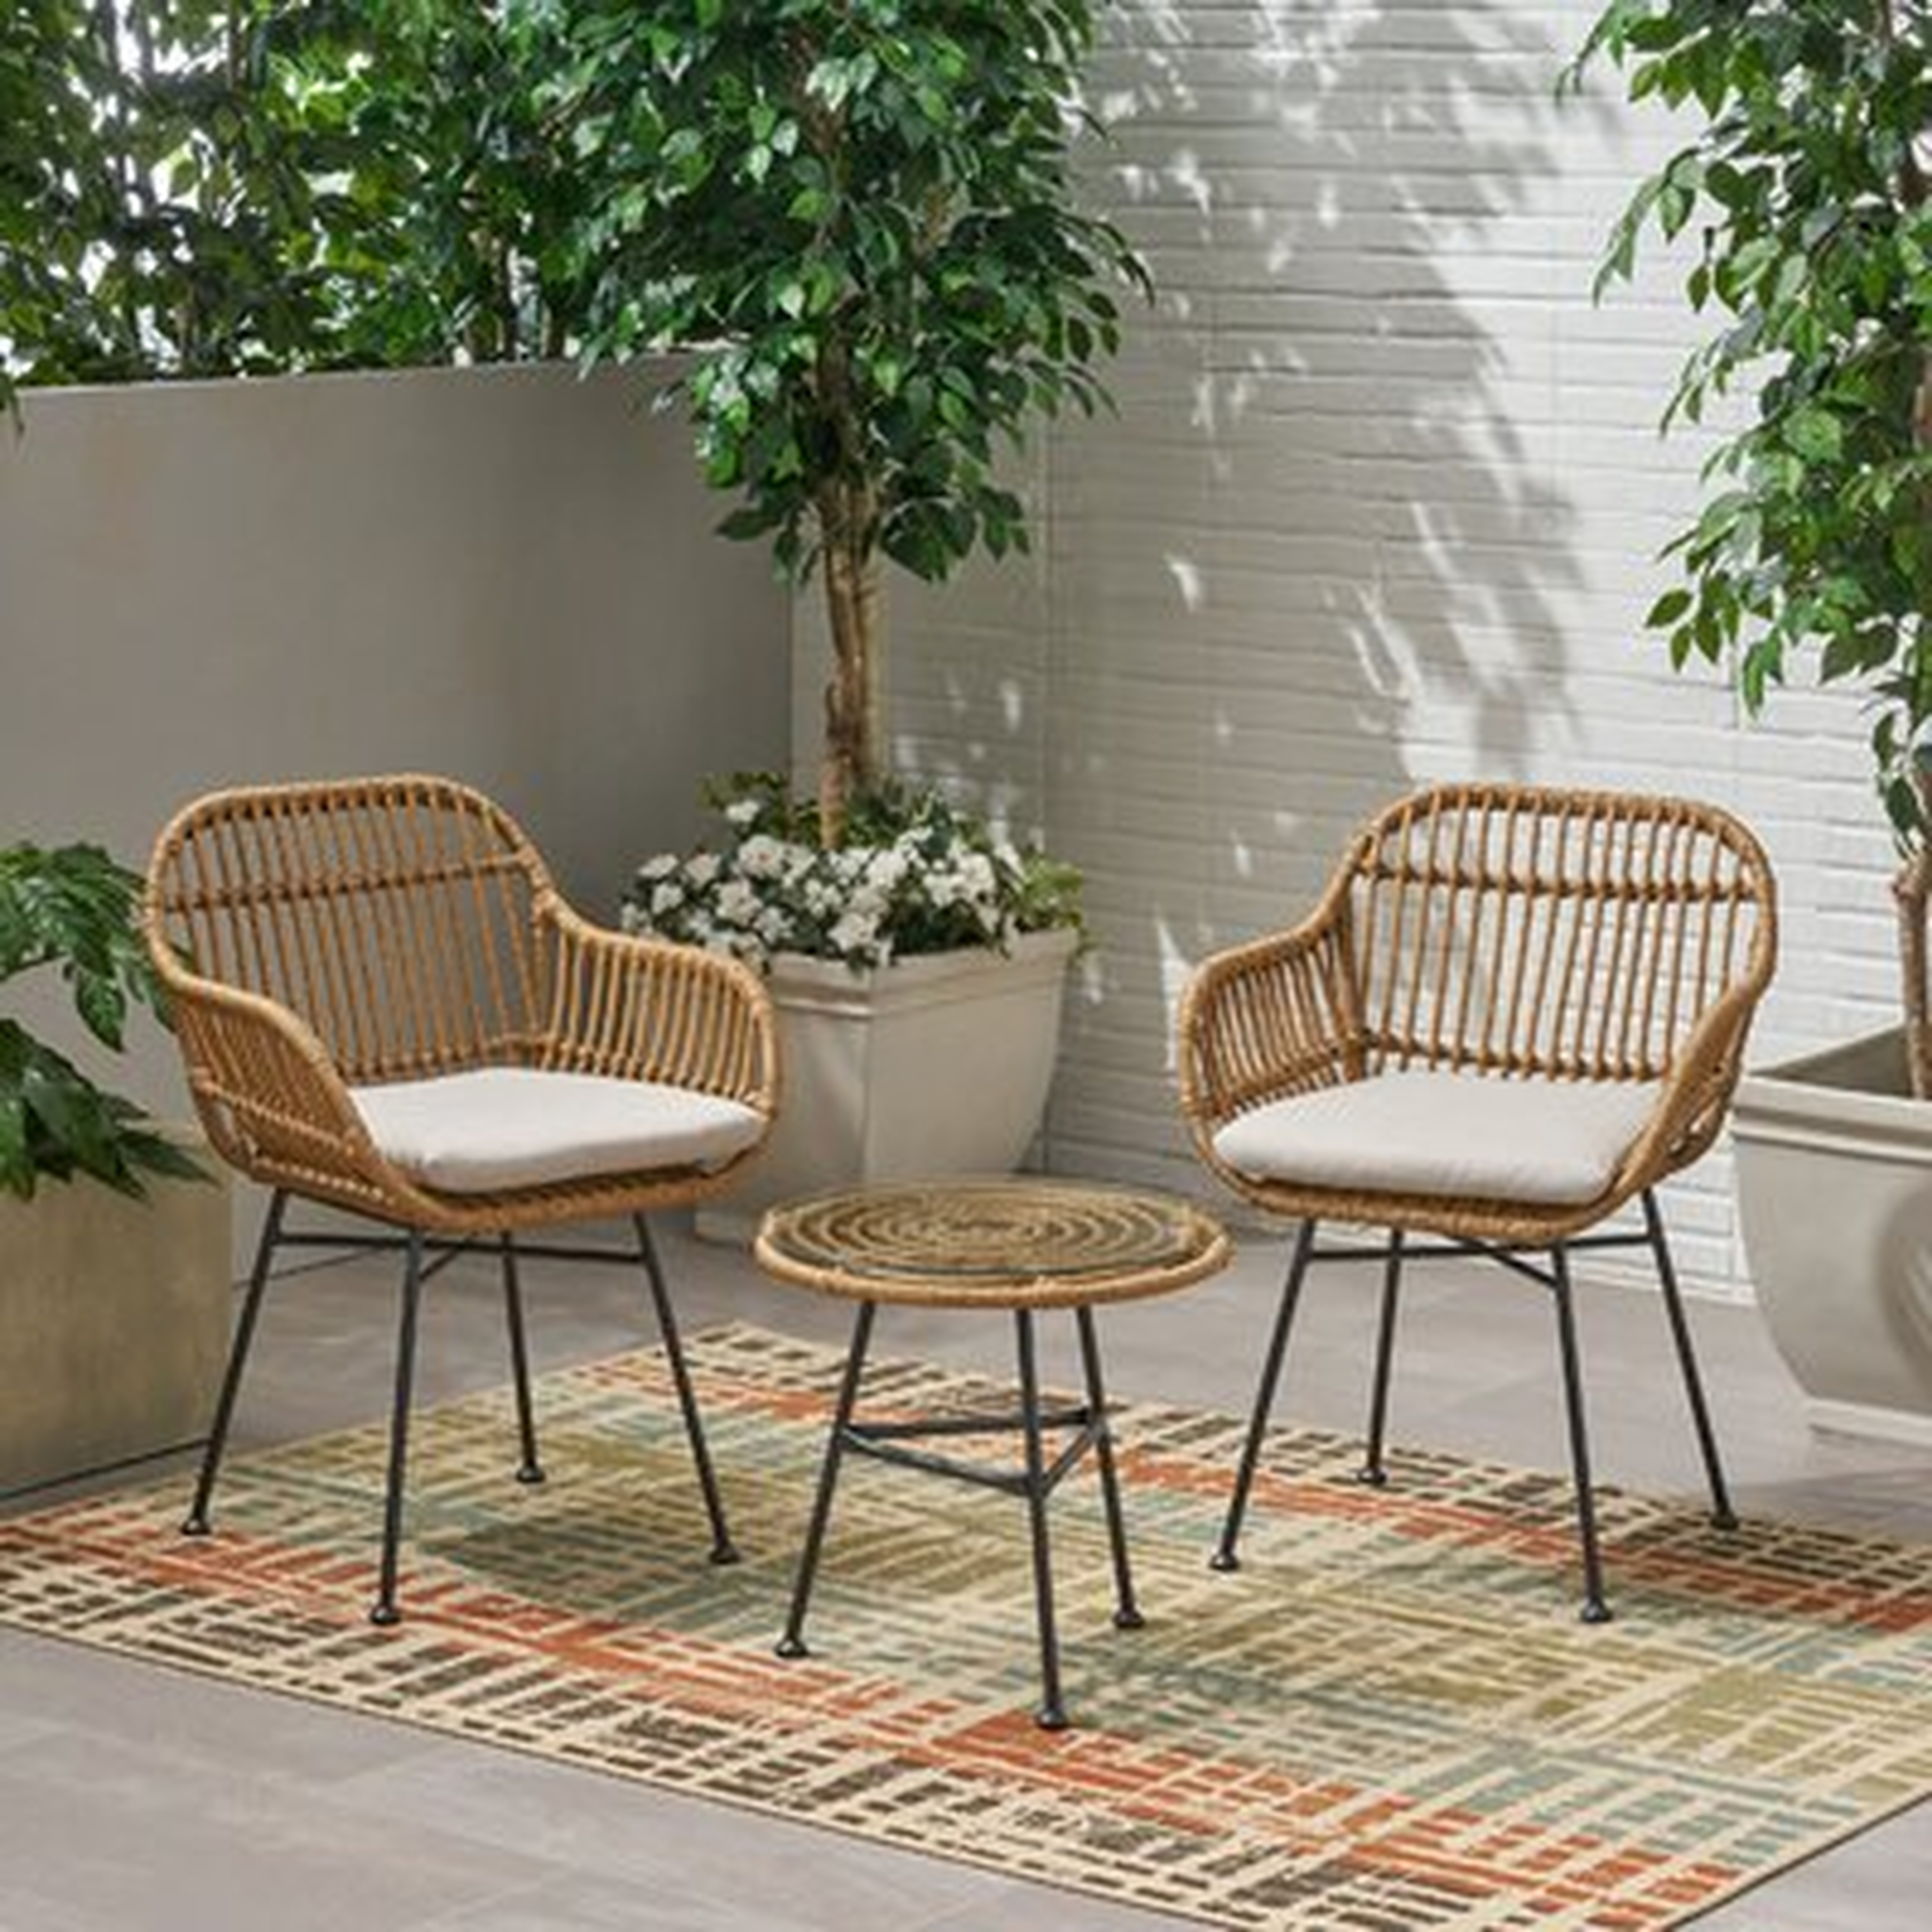 Bushnell 3 Piece Rattan Seating Group with Cushions - Wayfair